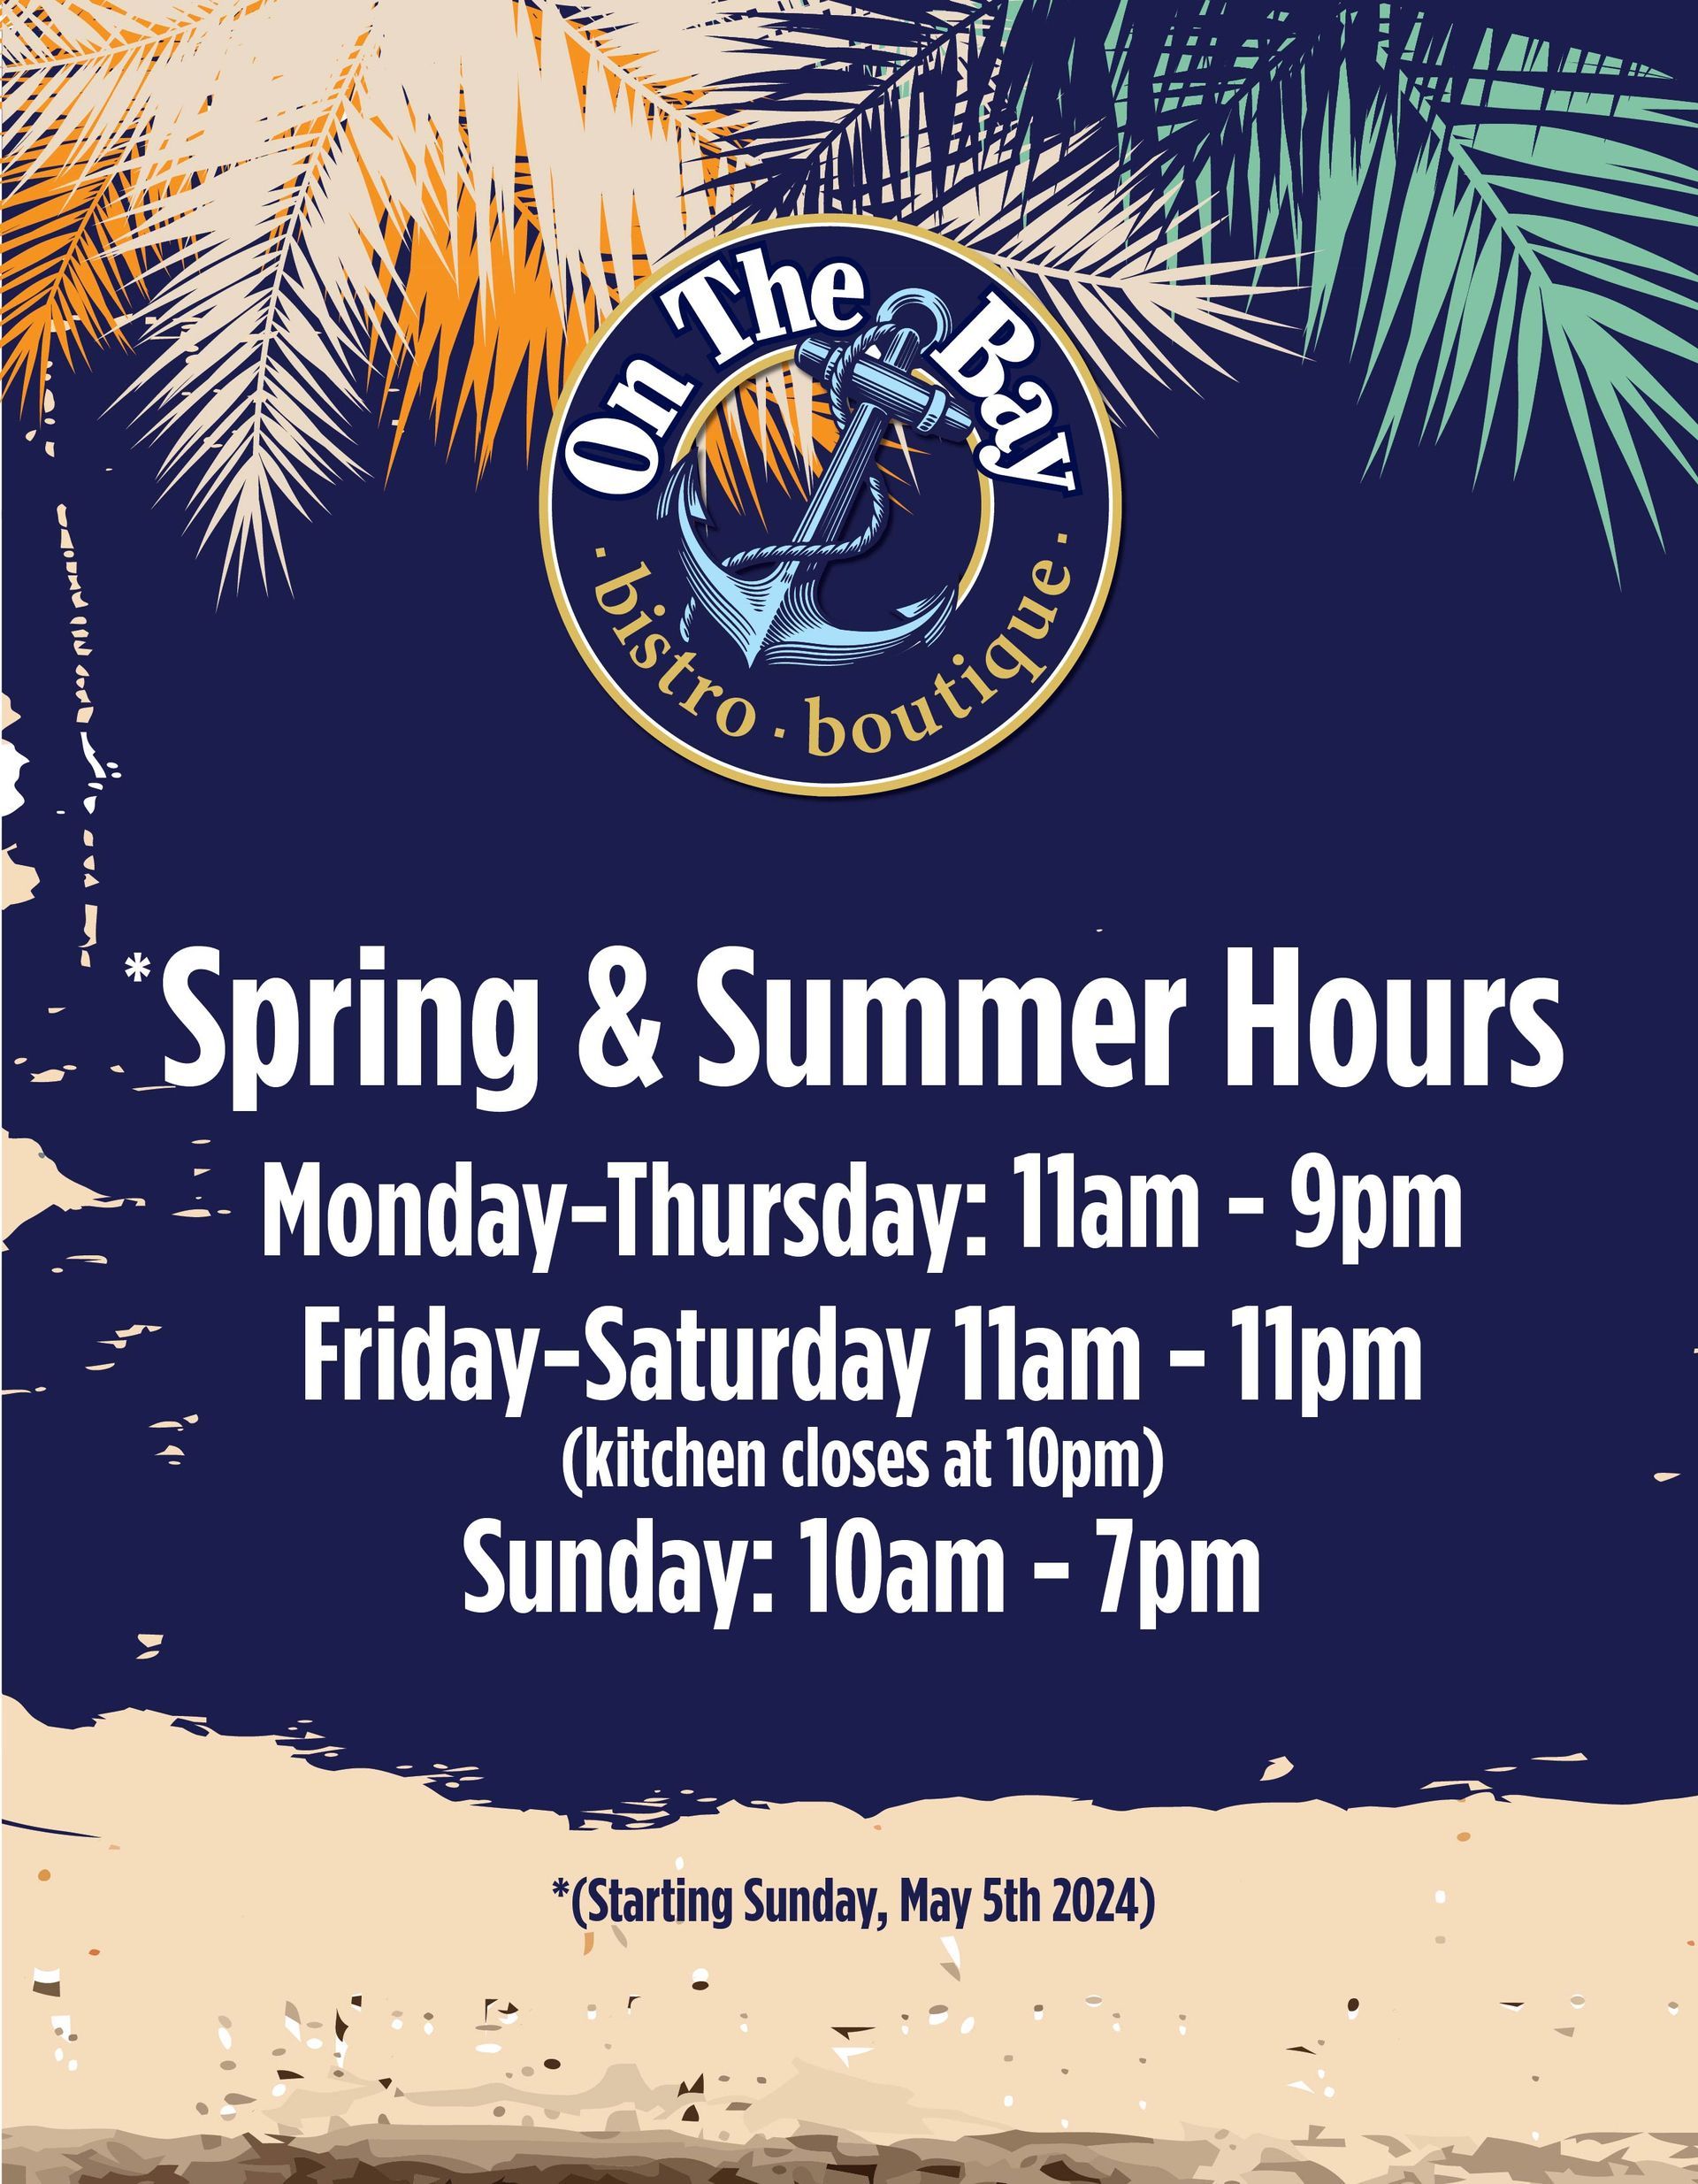 New Sumer hours at On The Bay restaurant and tiki bar in New Baltimore Michigan